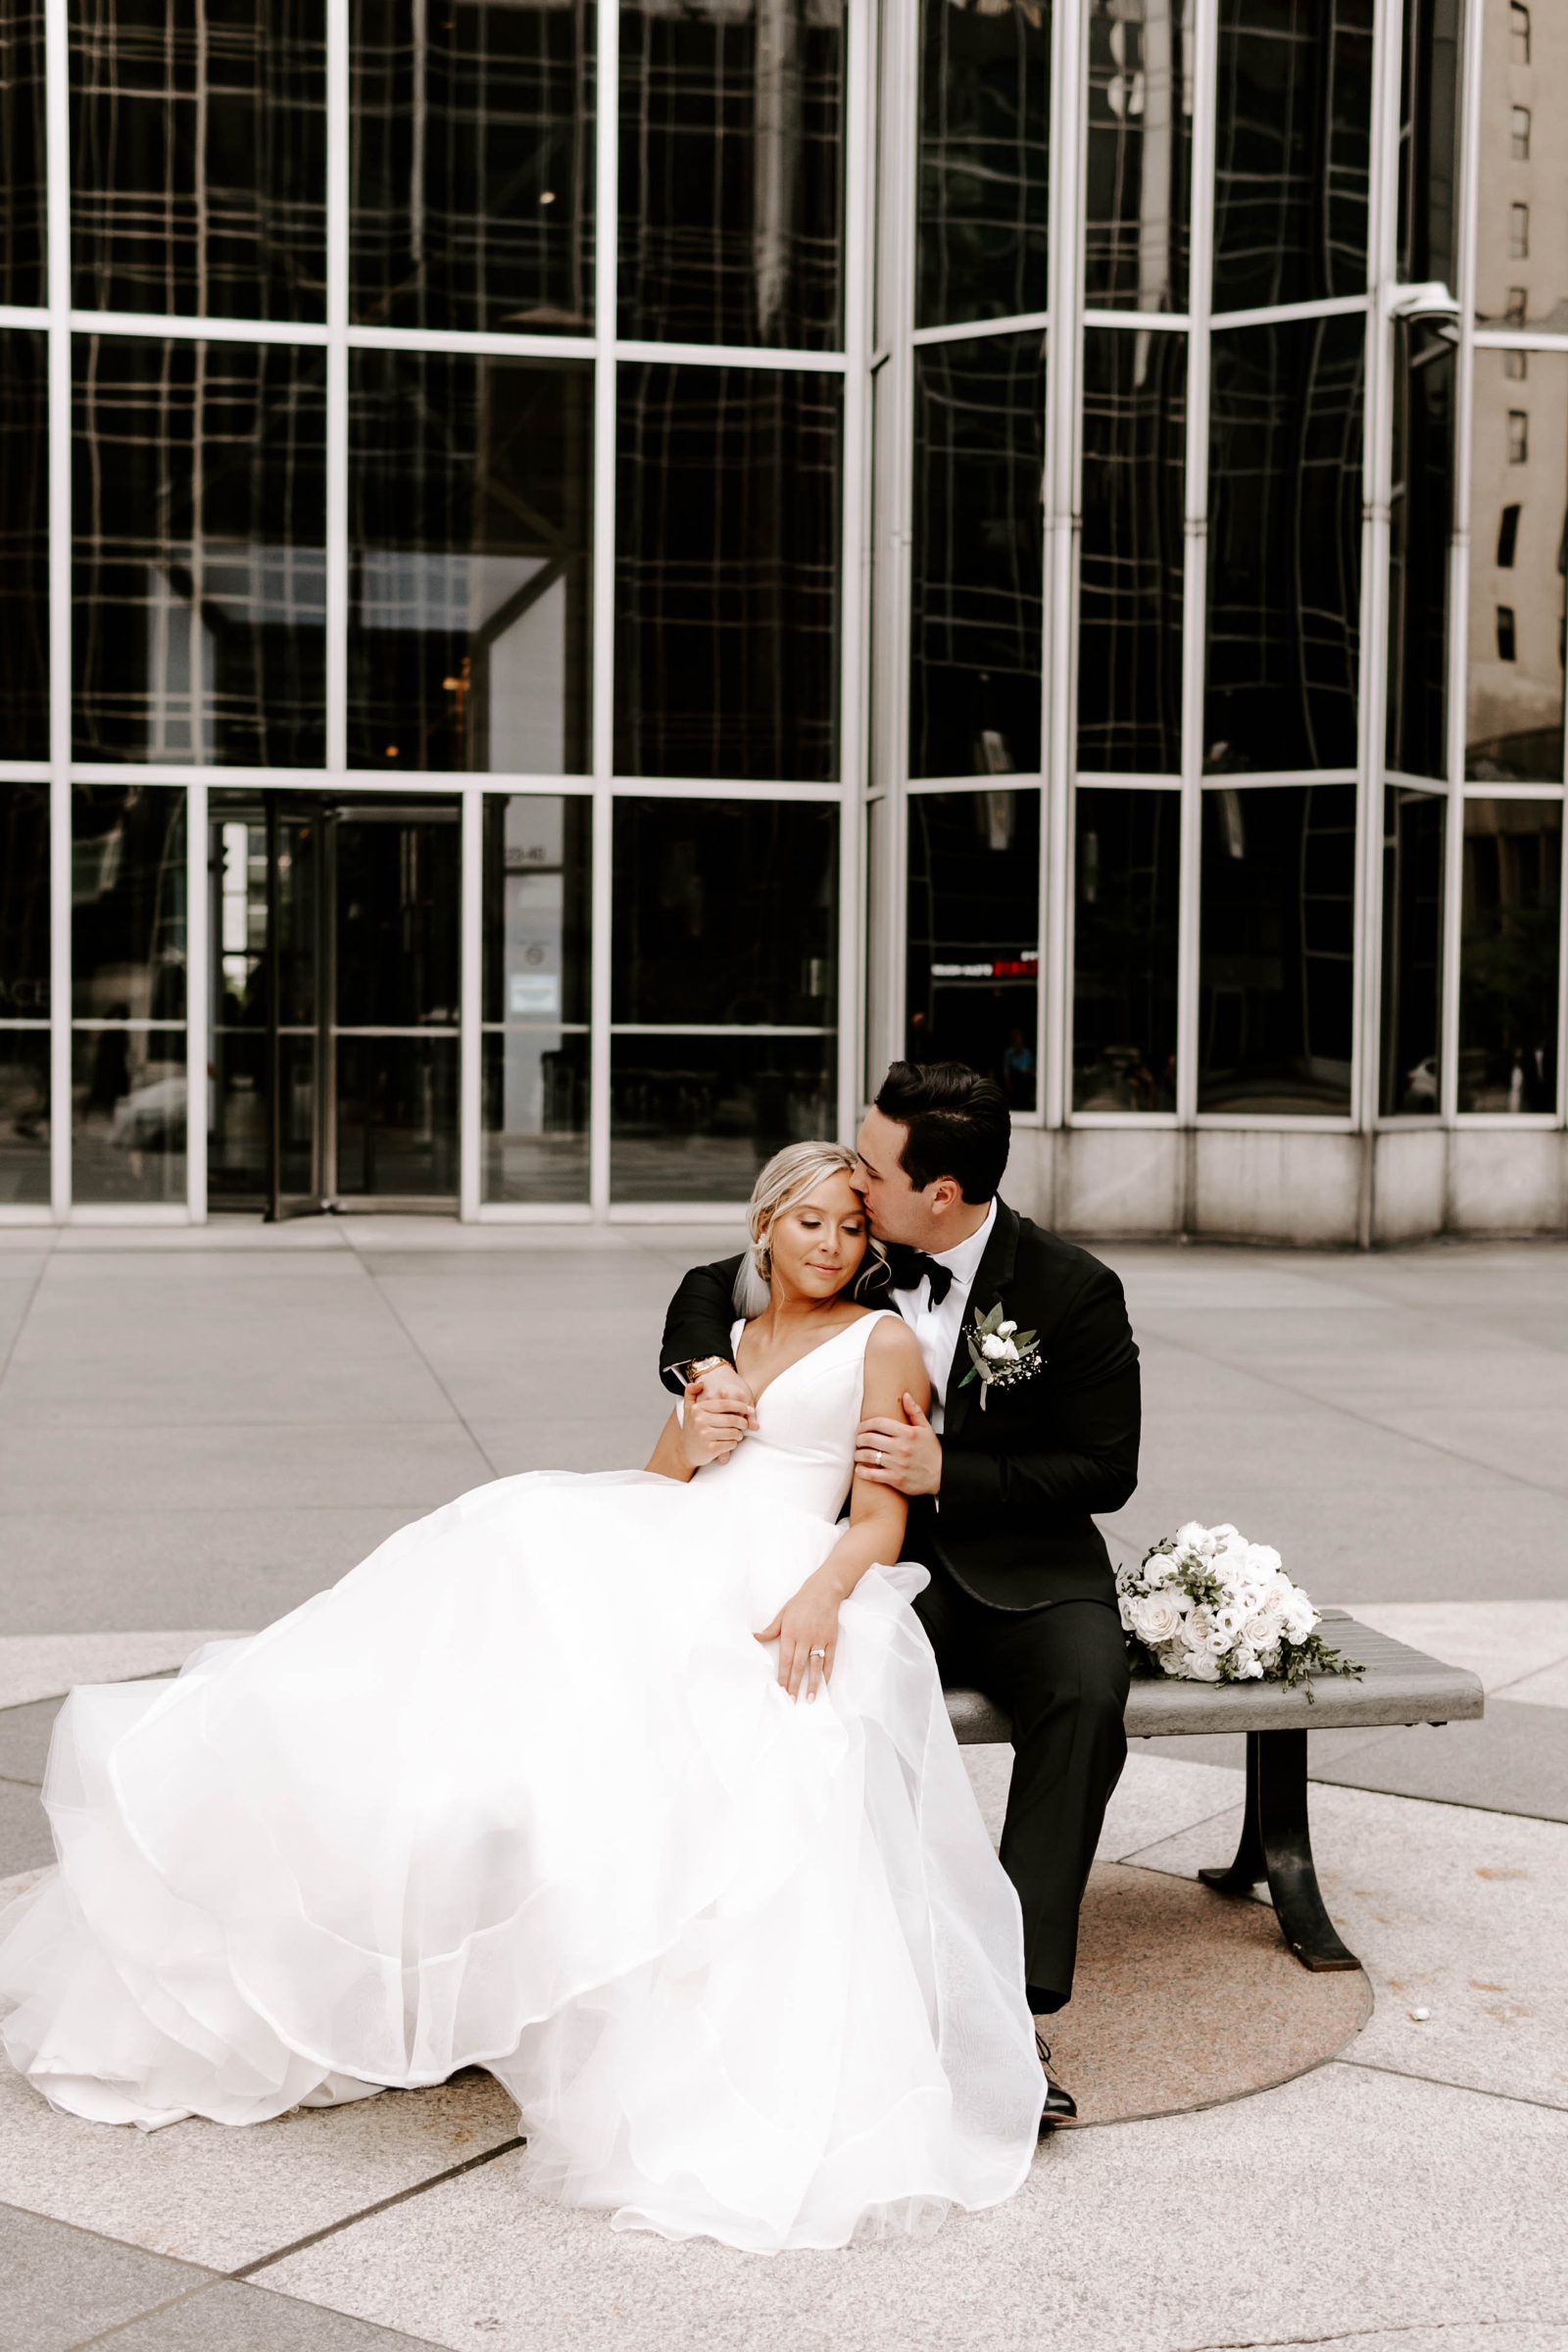 Wintergarden at PPG Place Wedding Pittsburgh